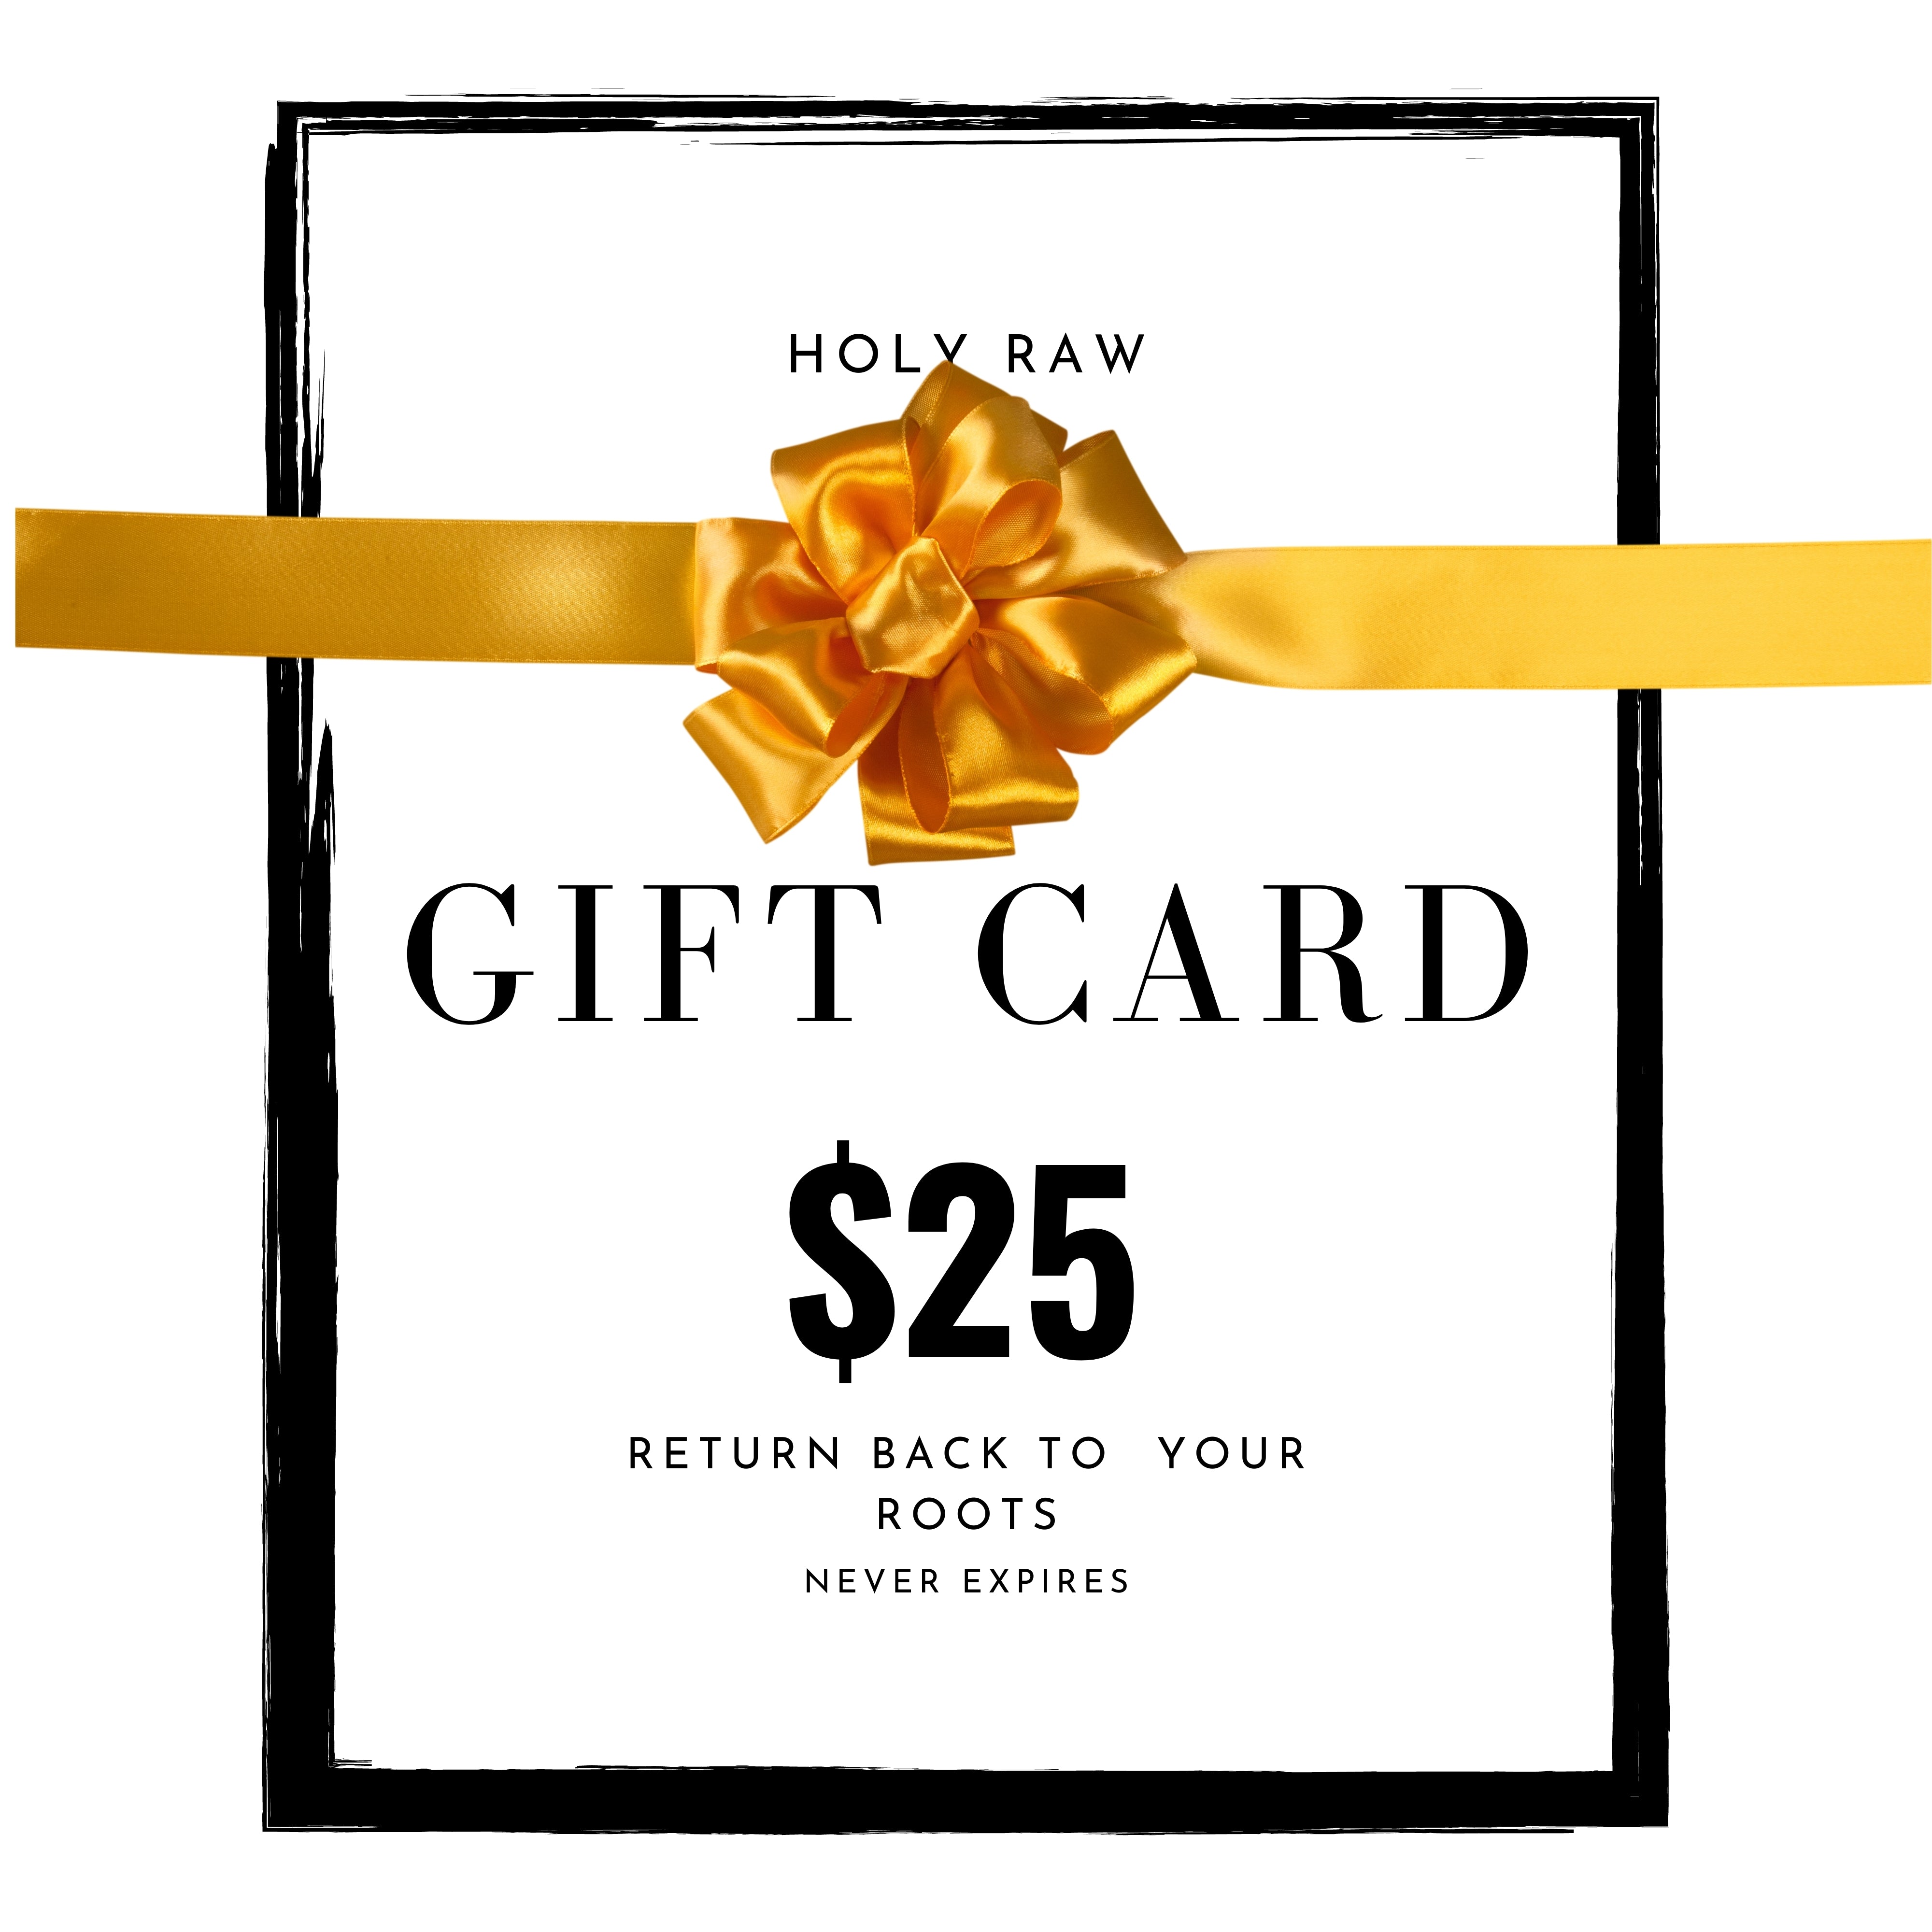 Holy Raw Gift Card